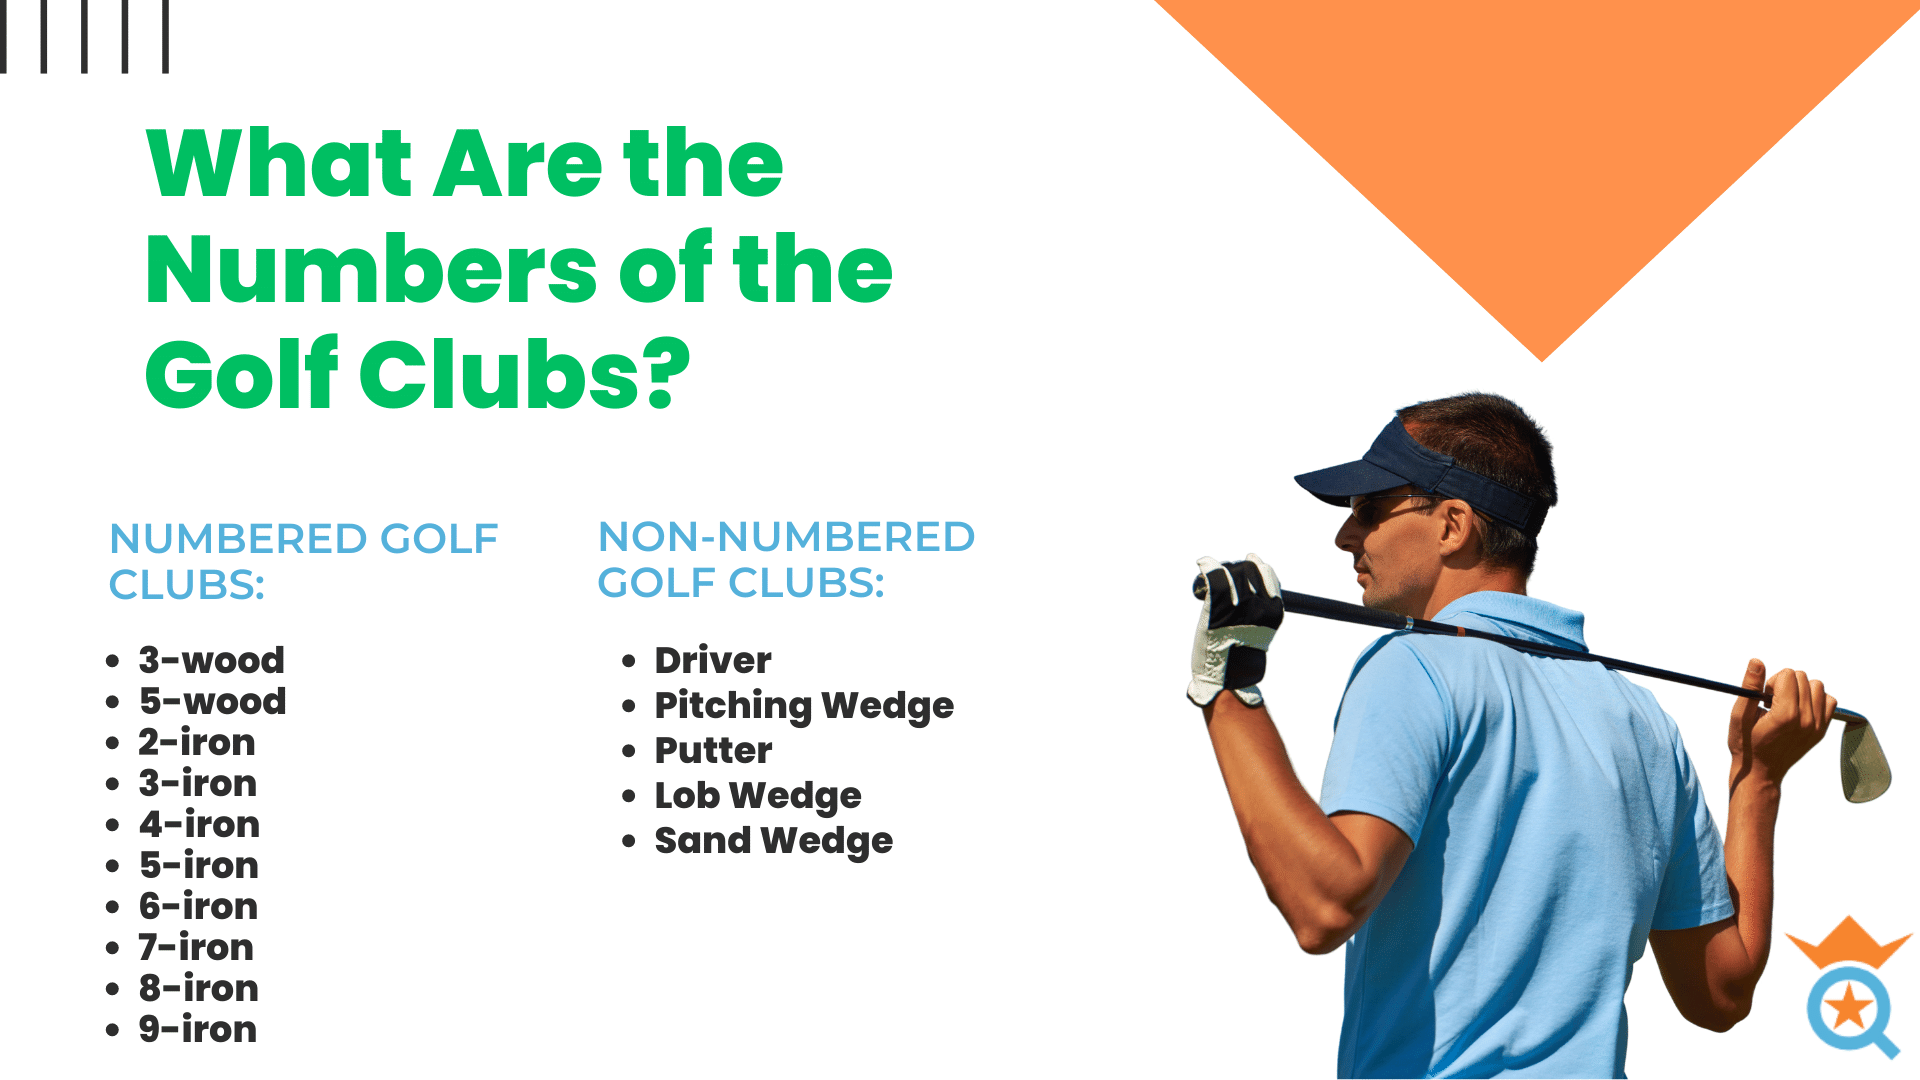 What Are the Numbers of the Golf Clubs?